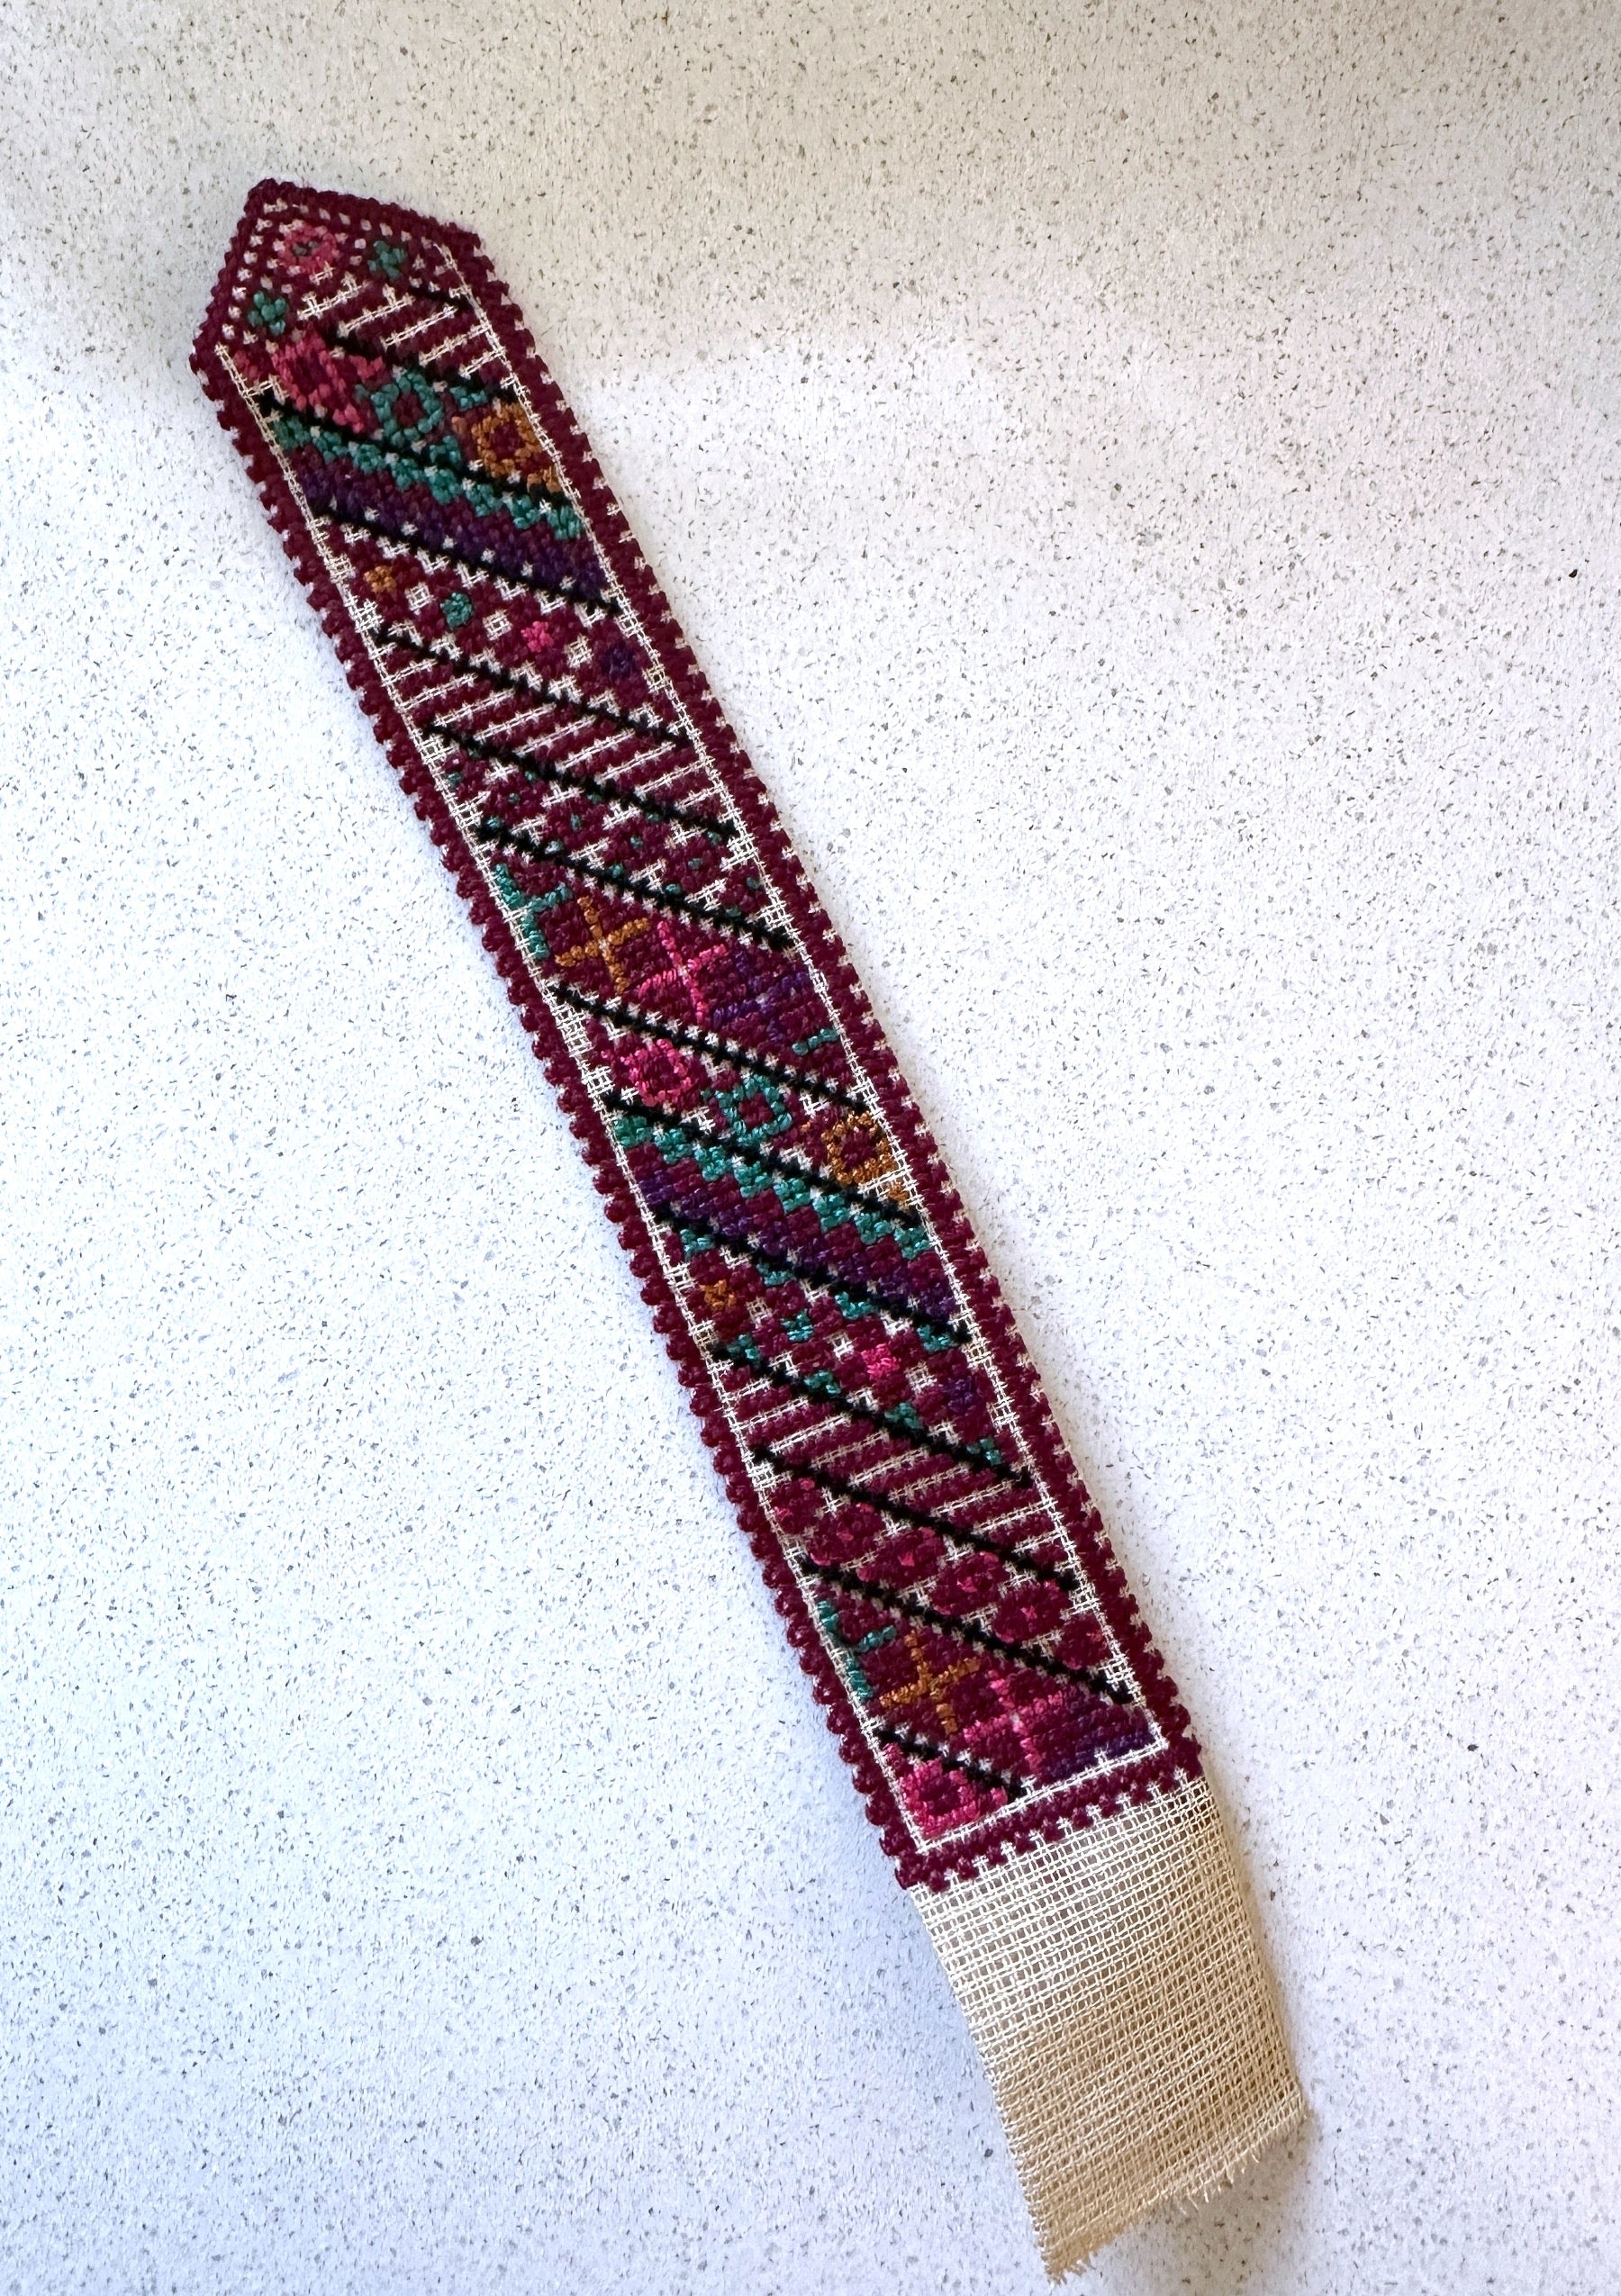 Palestinian Hand Embroidered Bookmark - Motifs